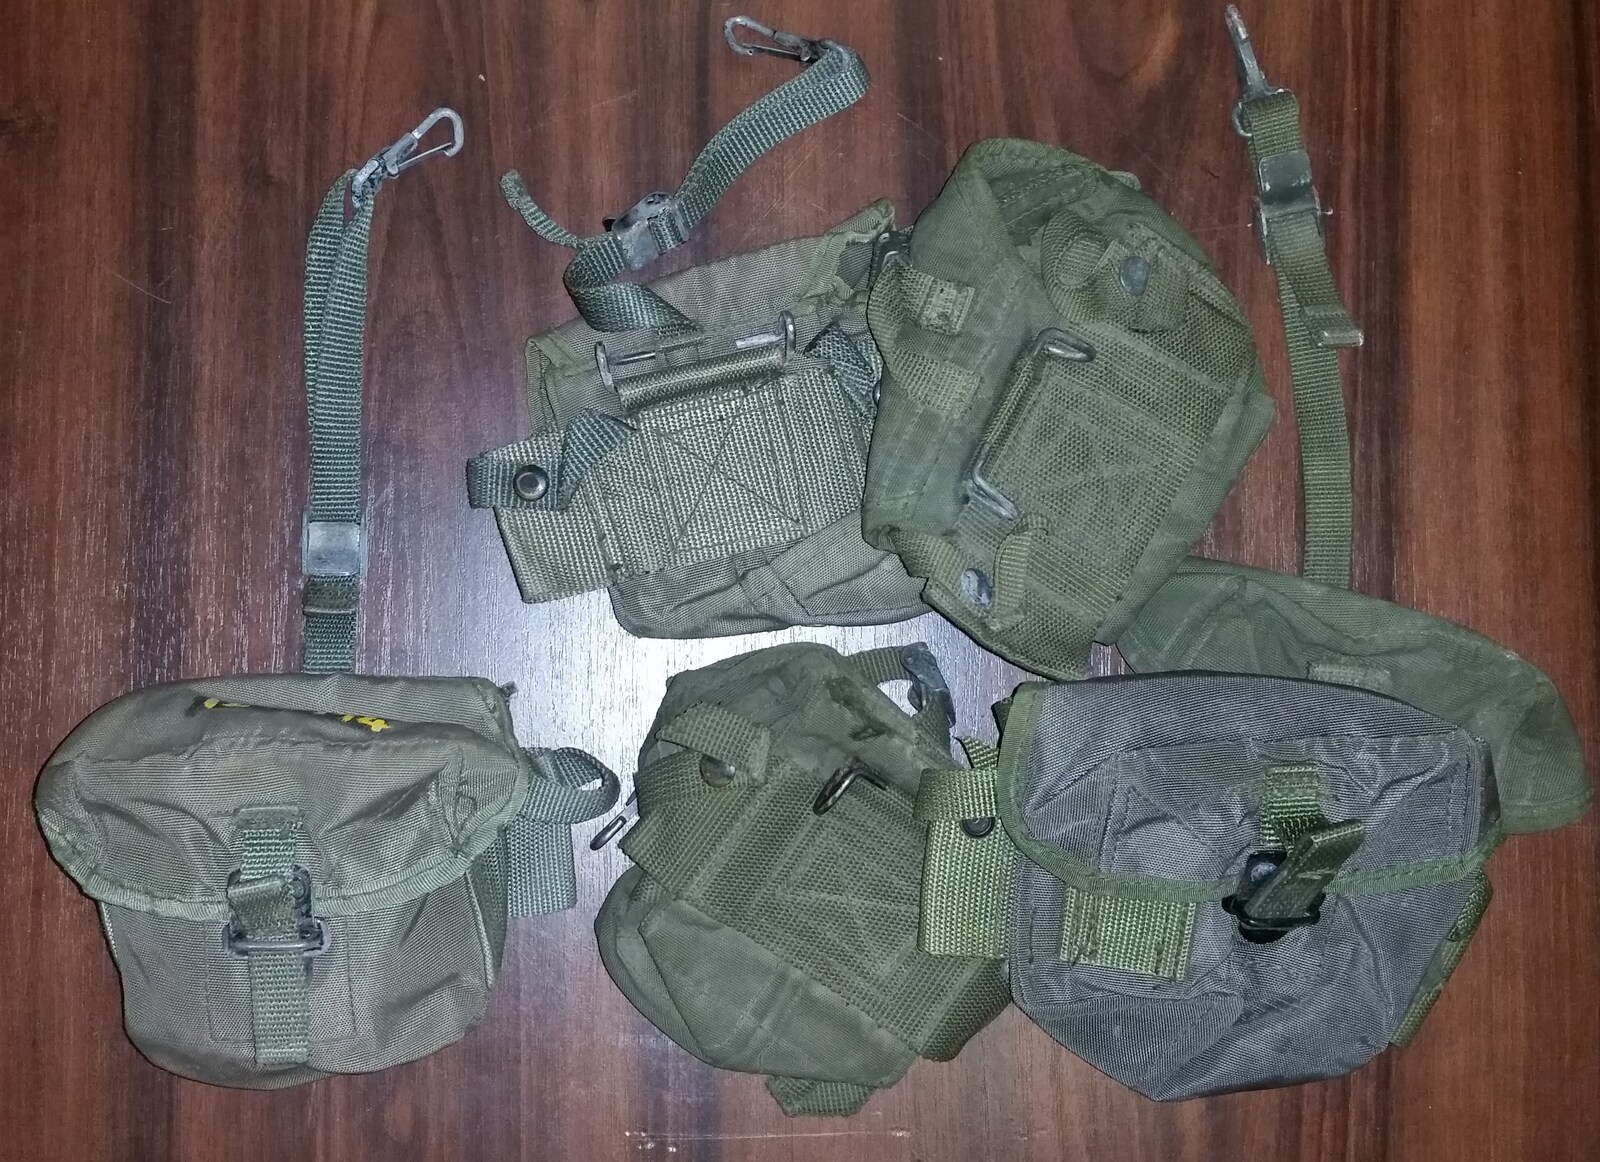 M16 AMMO POUCH EX-KOREAN ARMY USED